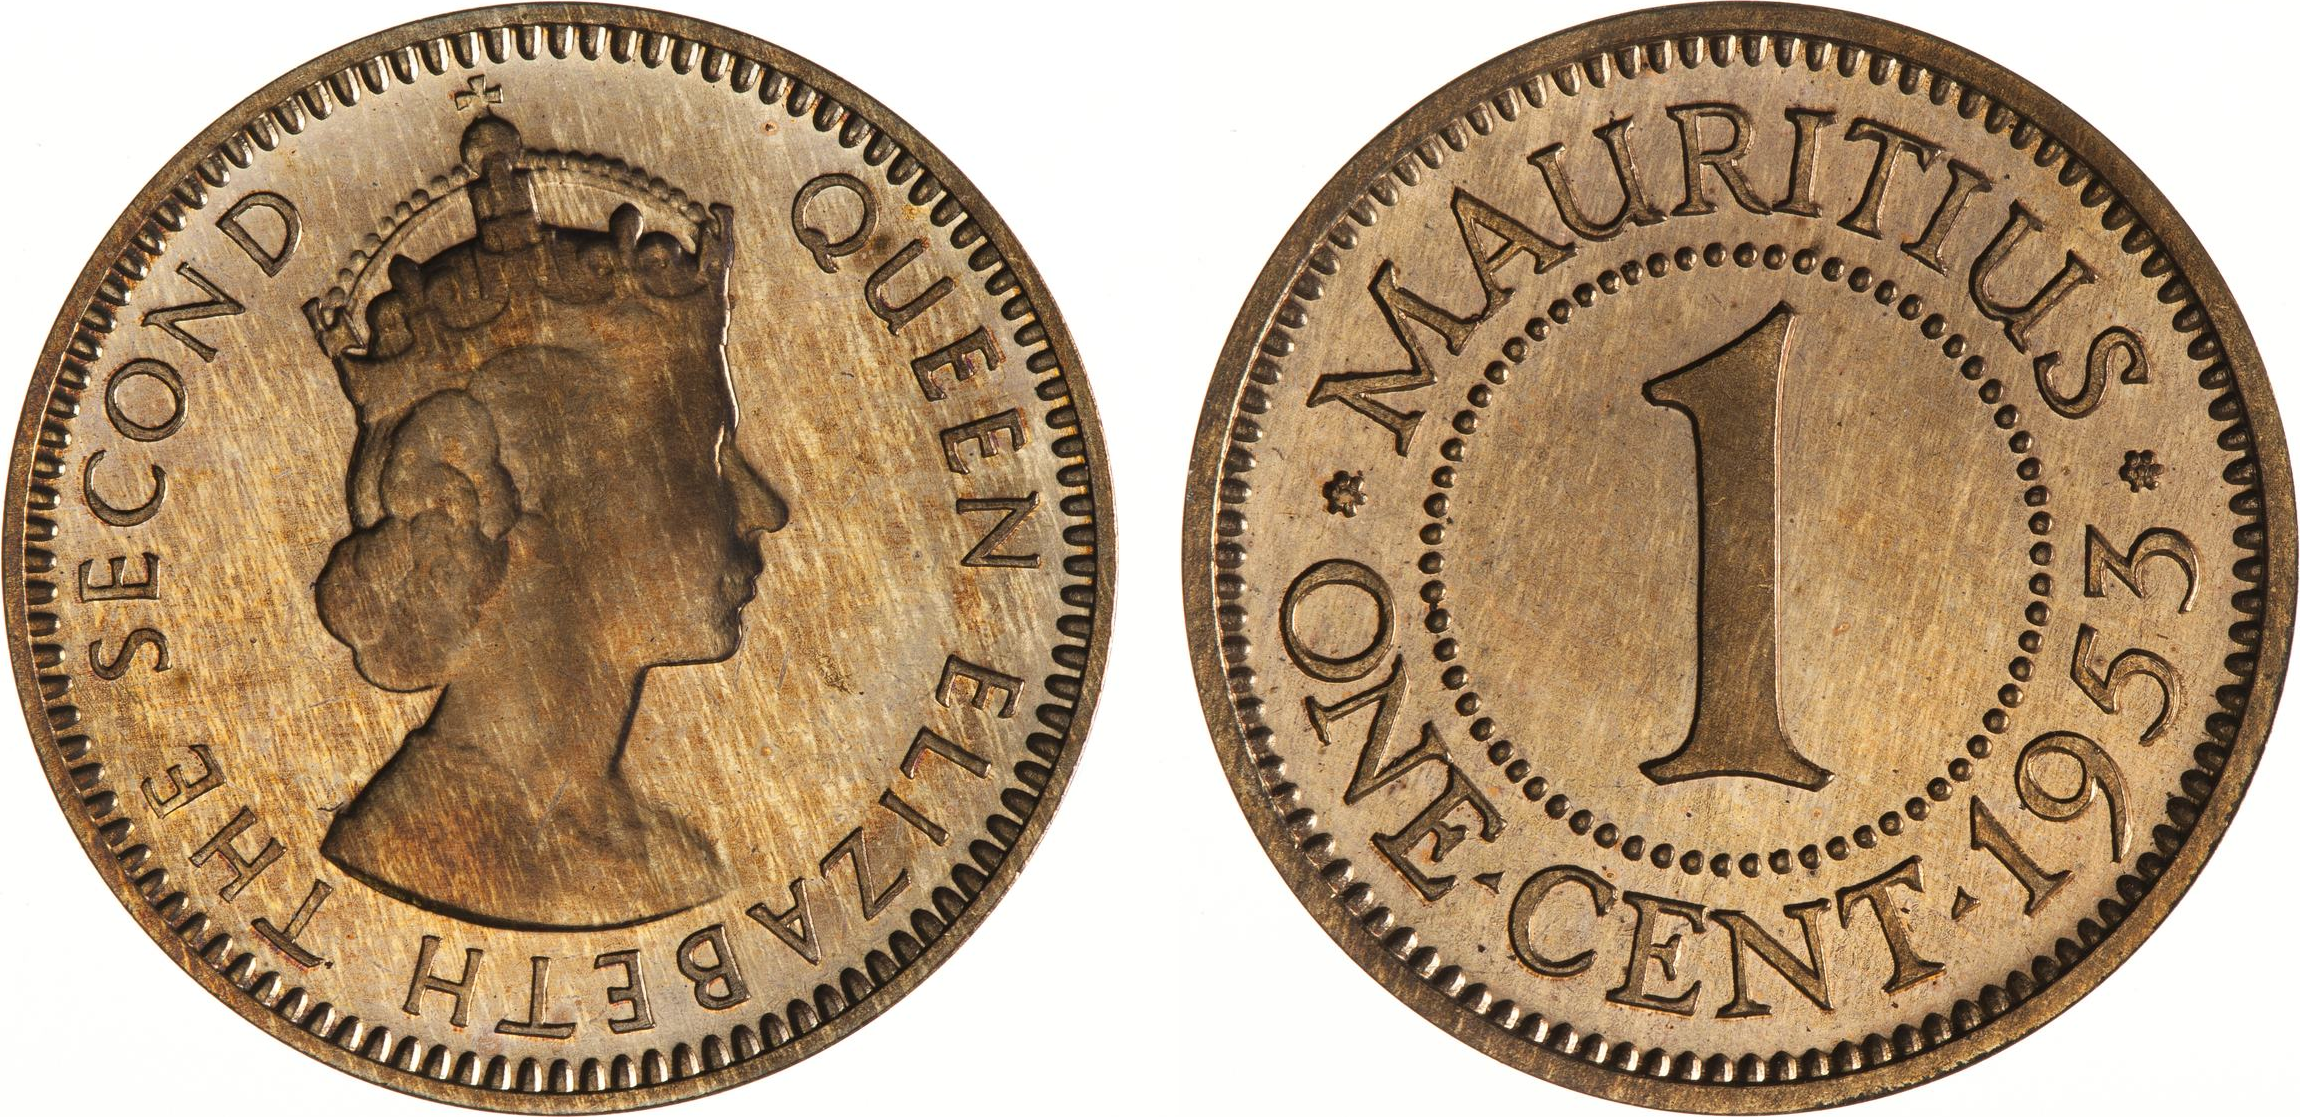 Mauritian 1 cent coin, Currency Wiki